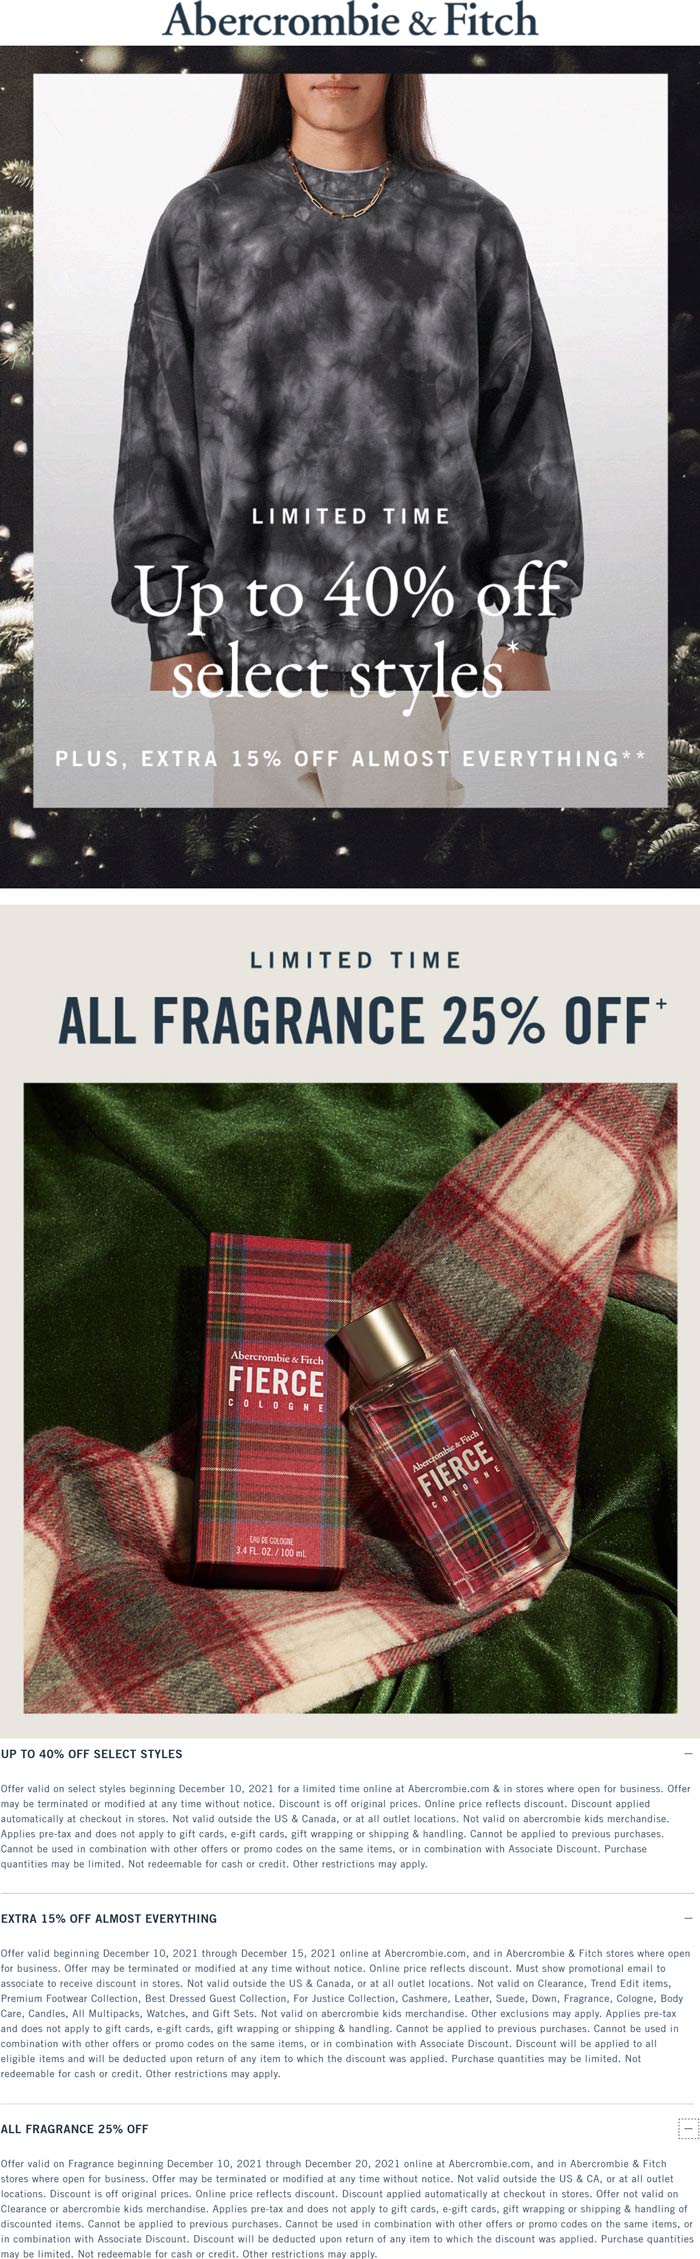 Abercrombie & Fitch stores Coupon  25% off fragrance & 15-40% off everything else at Abercrombie & Fitch, ditto online #abercrombiefitch 